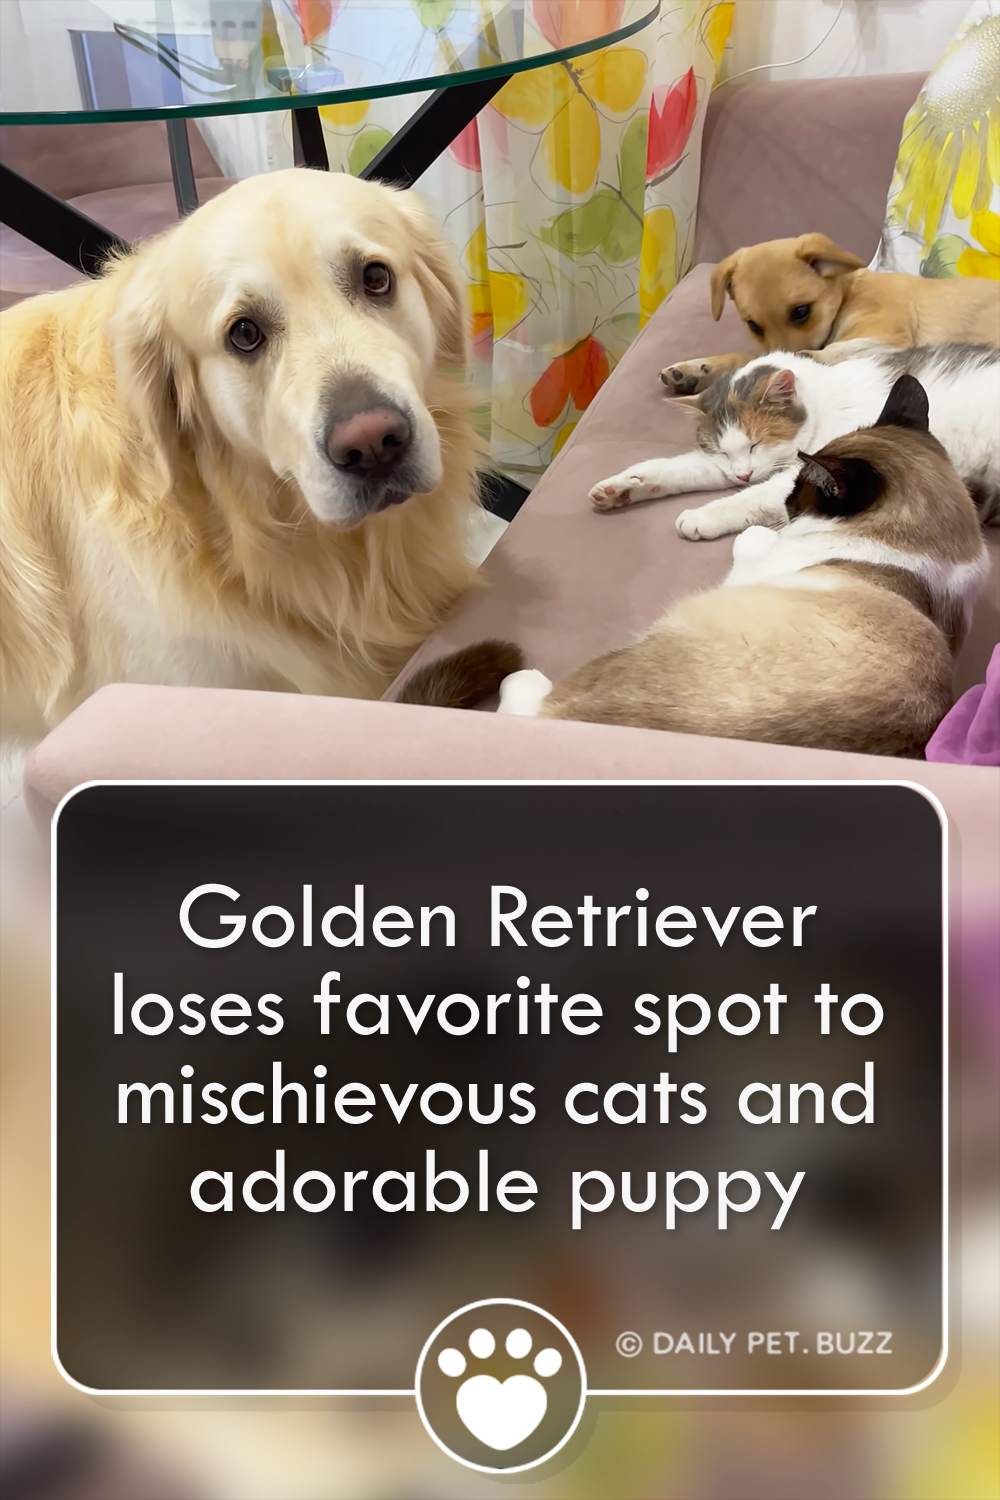 Golden Retriever loses favorite spot to mischievous cats and adorable puppy